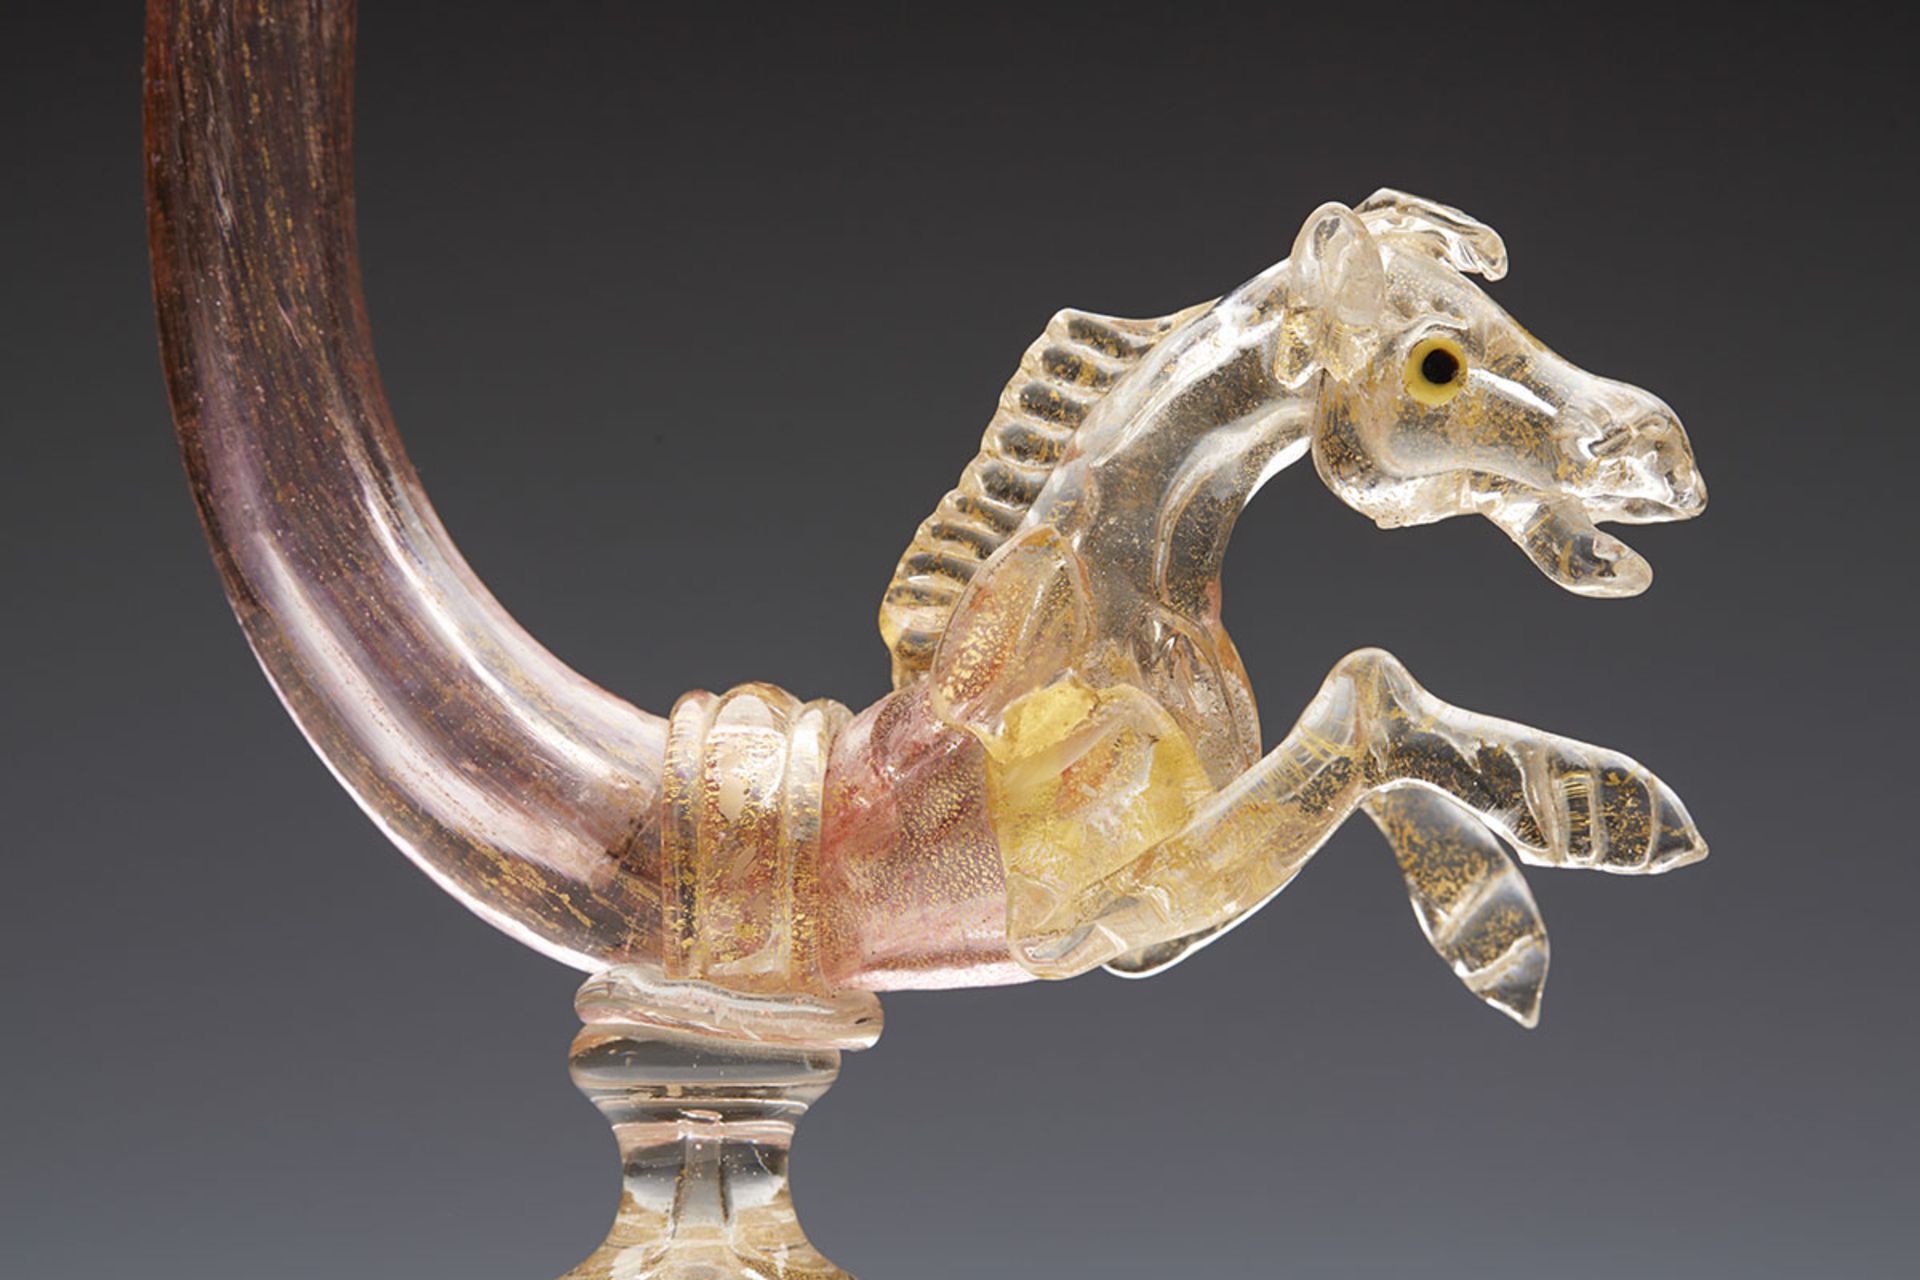 Antique Venetian Trumpet Glass Vase With Horse Heads Early 20Th C. - Image 2 of 10